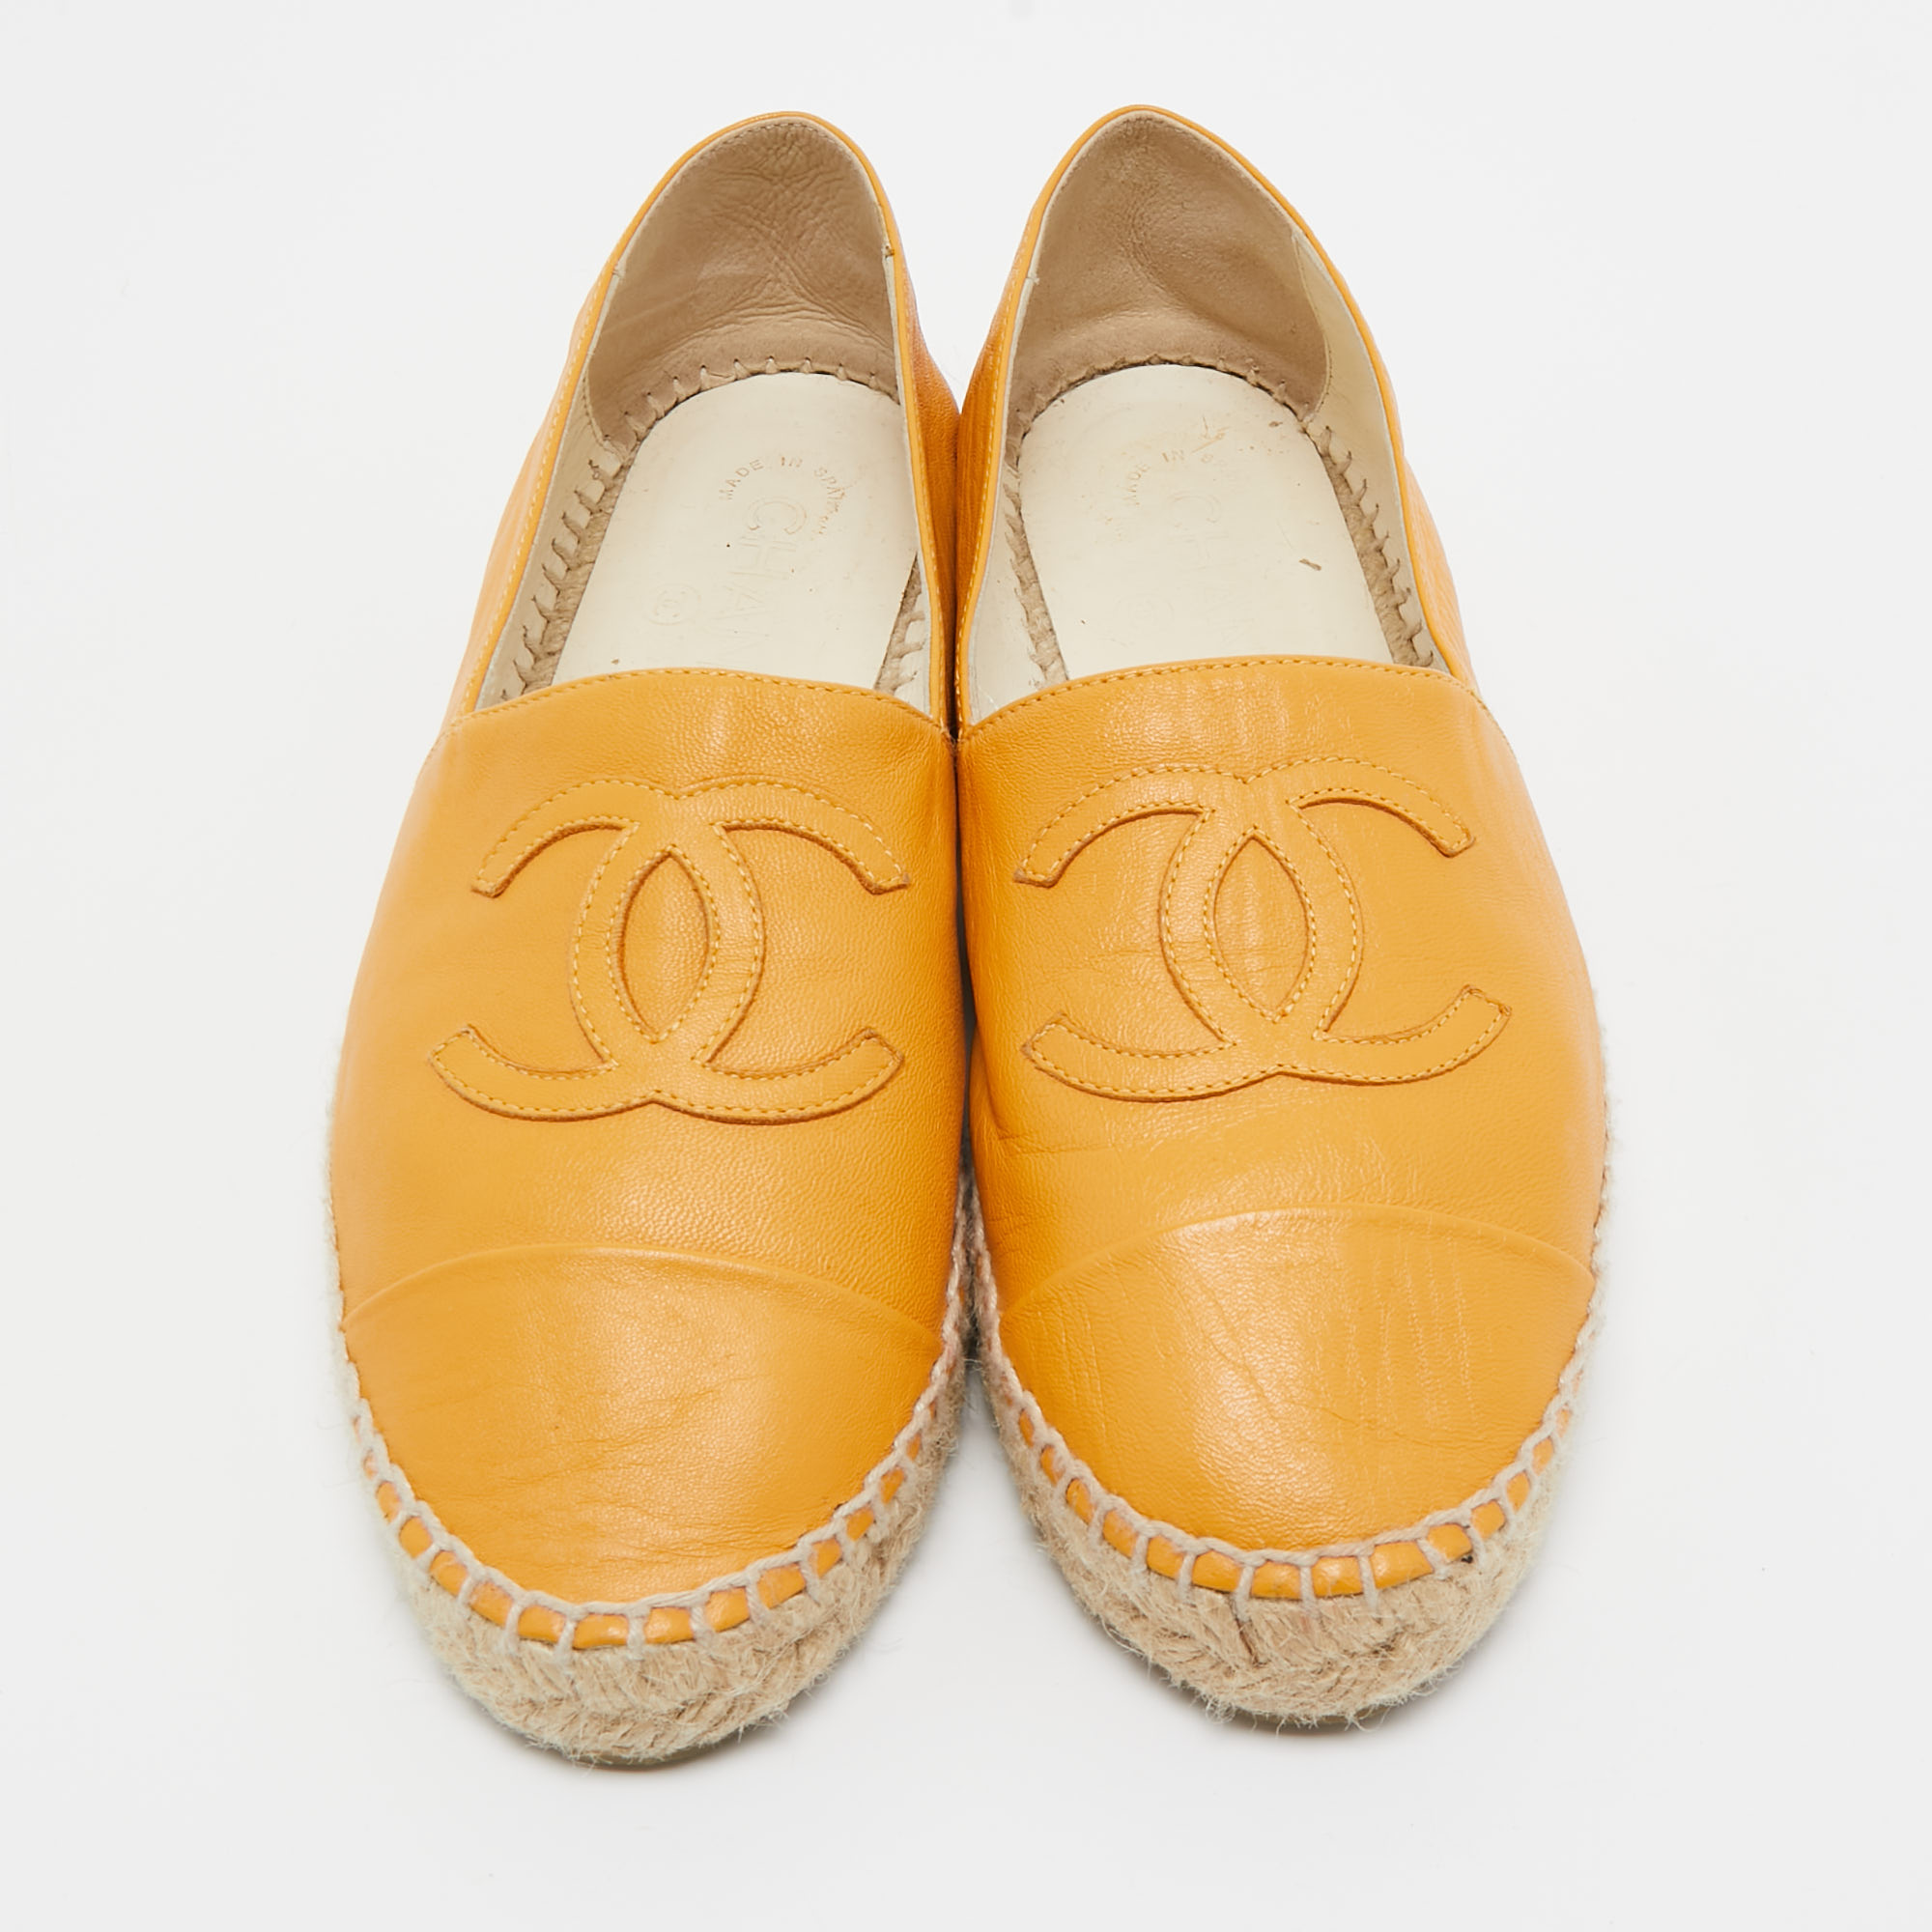 Chanel Yellow Leather CC Espadrille Flats Size 37